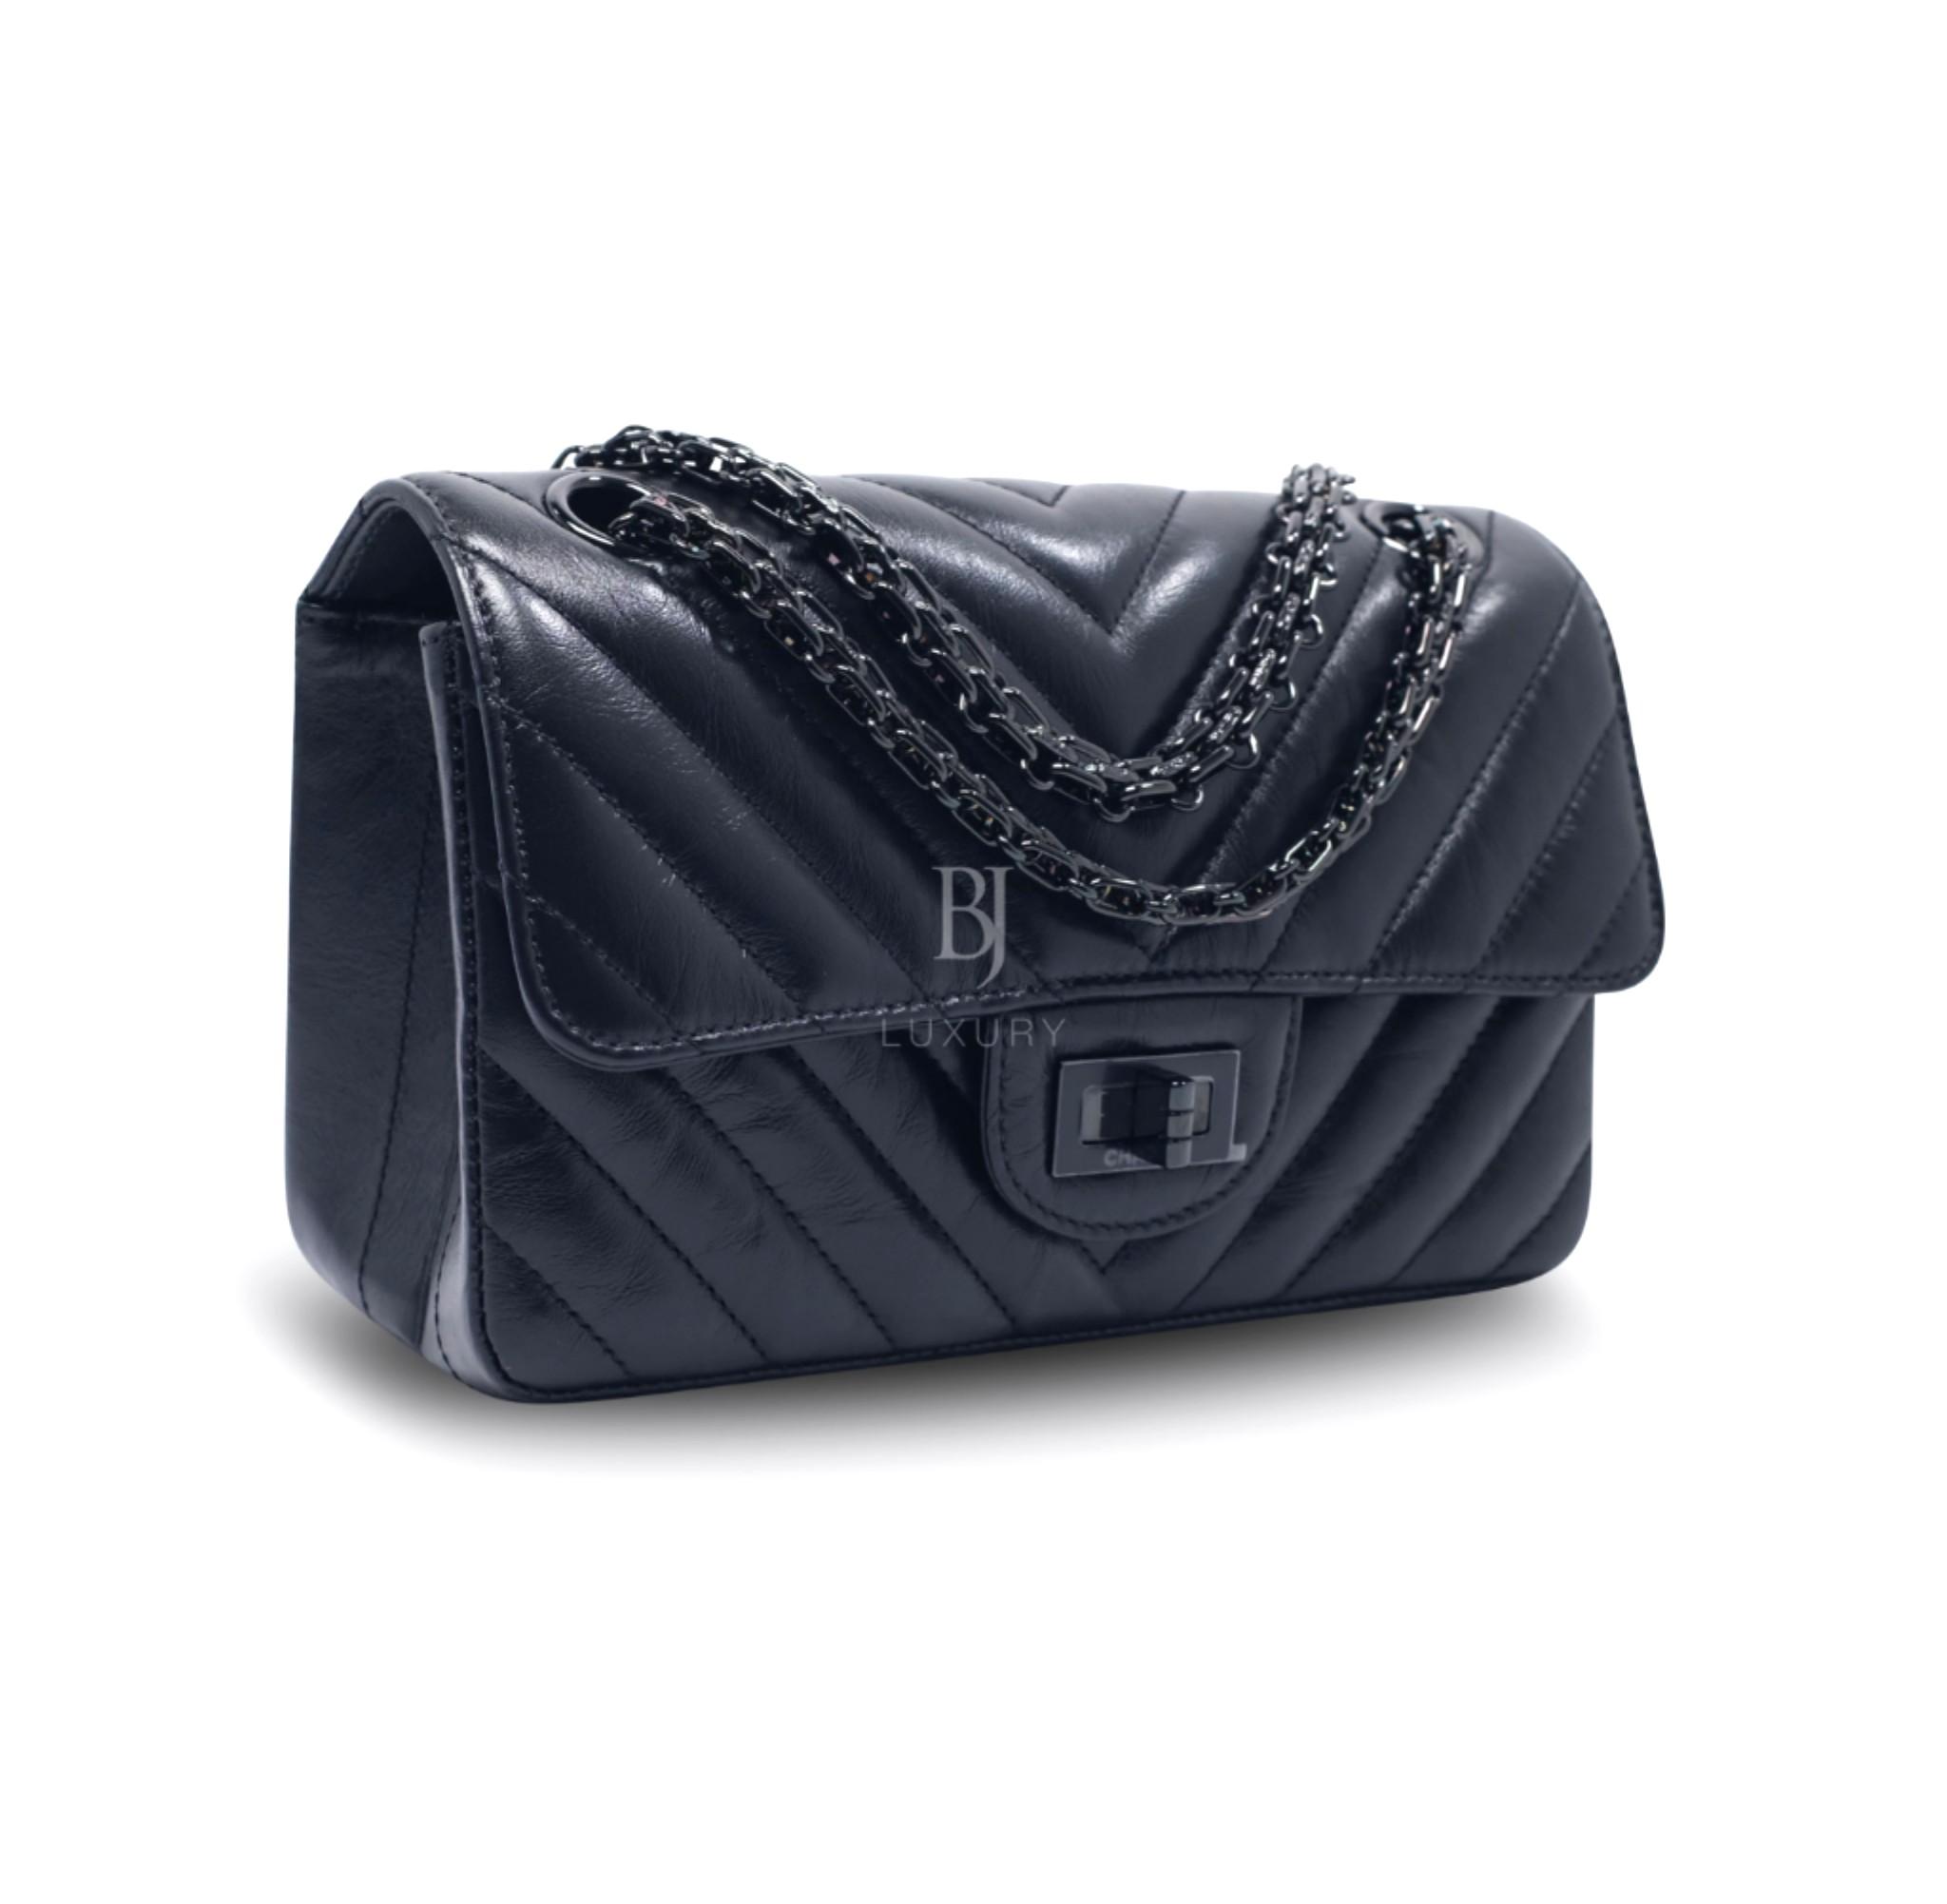 Chanel Black Quilted Patent Leather Reissue Mini So Black Flap Black Hardware, 2022 (Like New), Womens Handbag